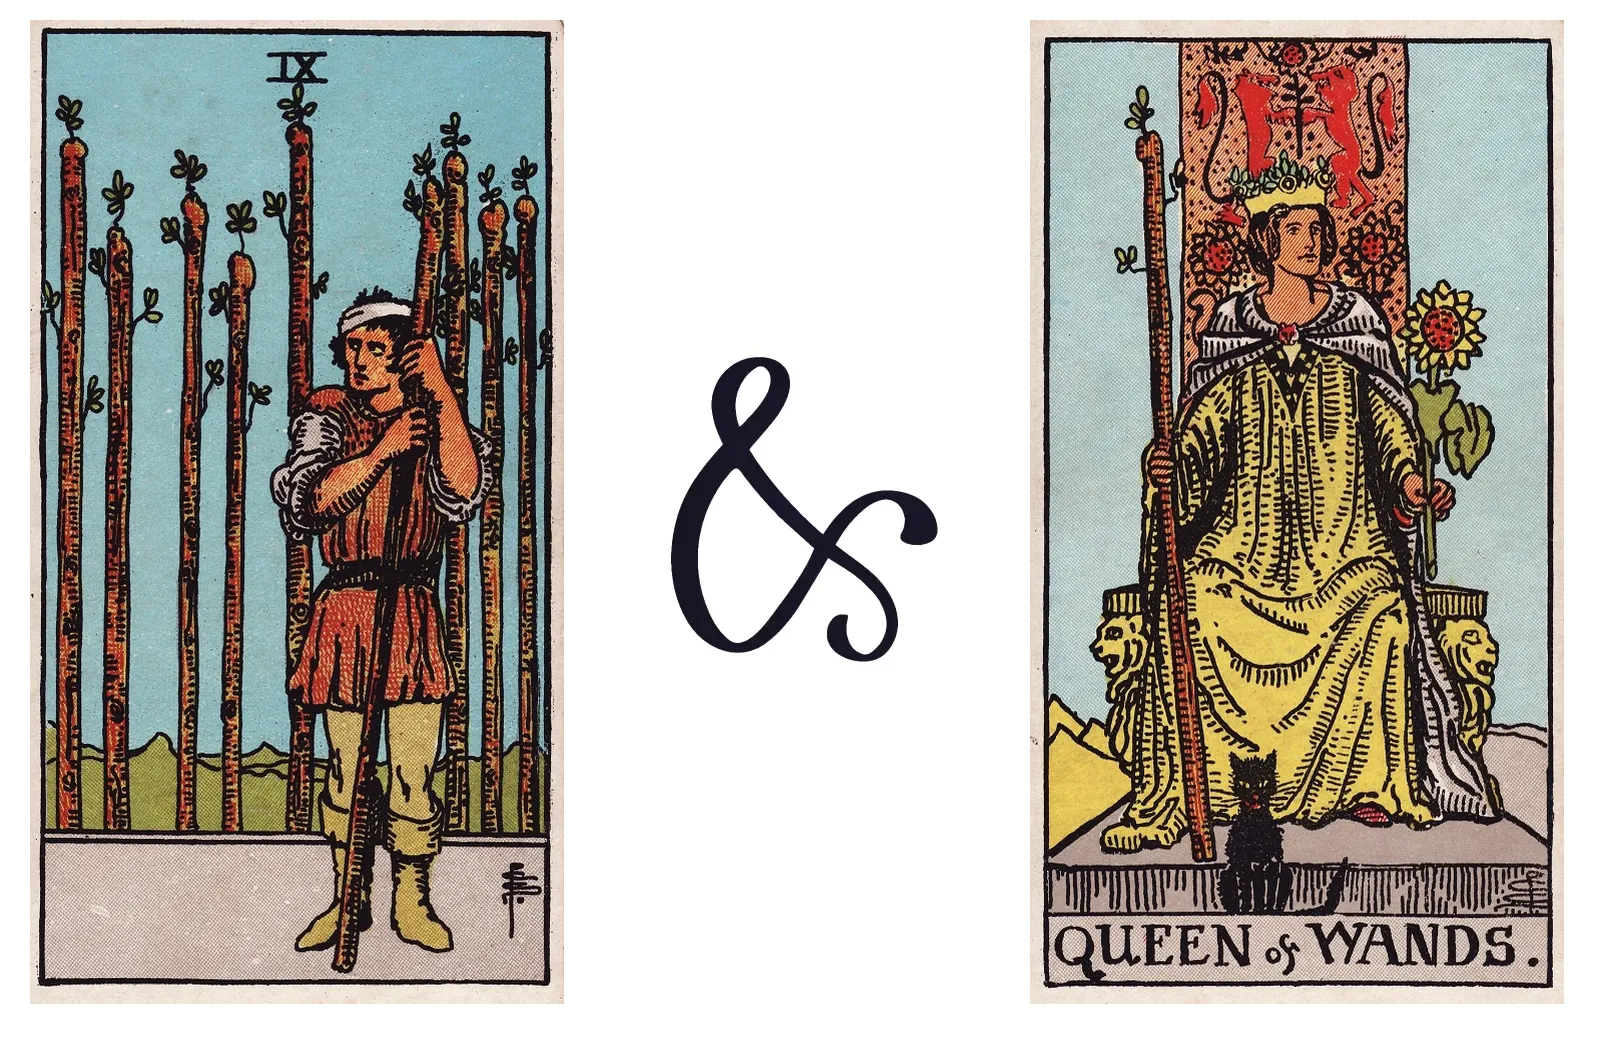 Nine of Wands and Queen of Wands